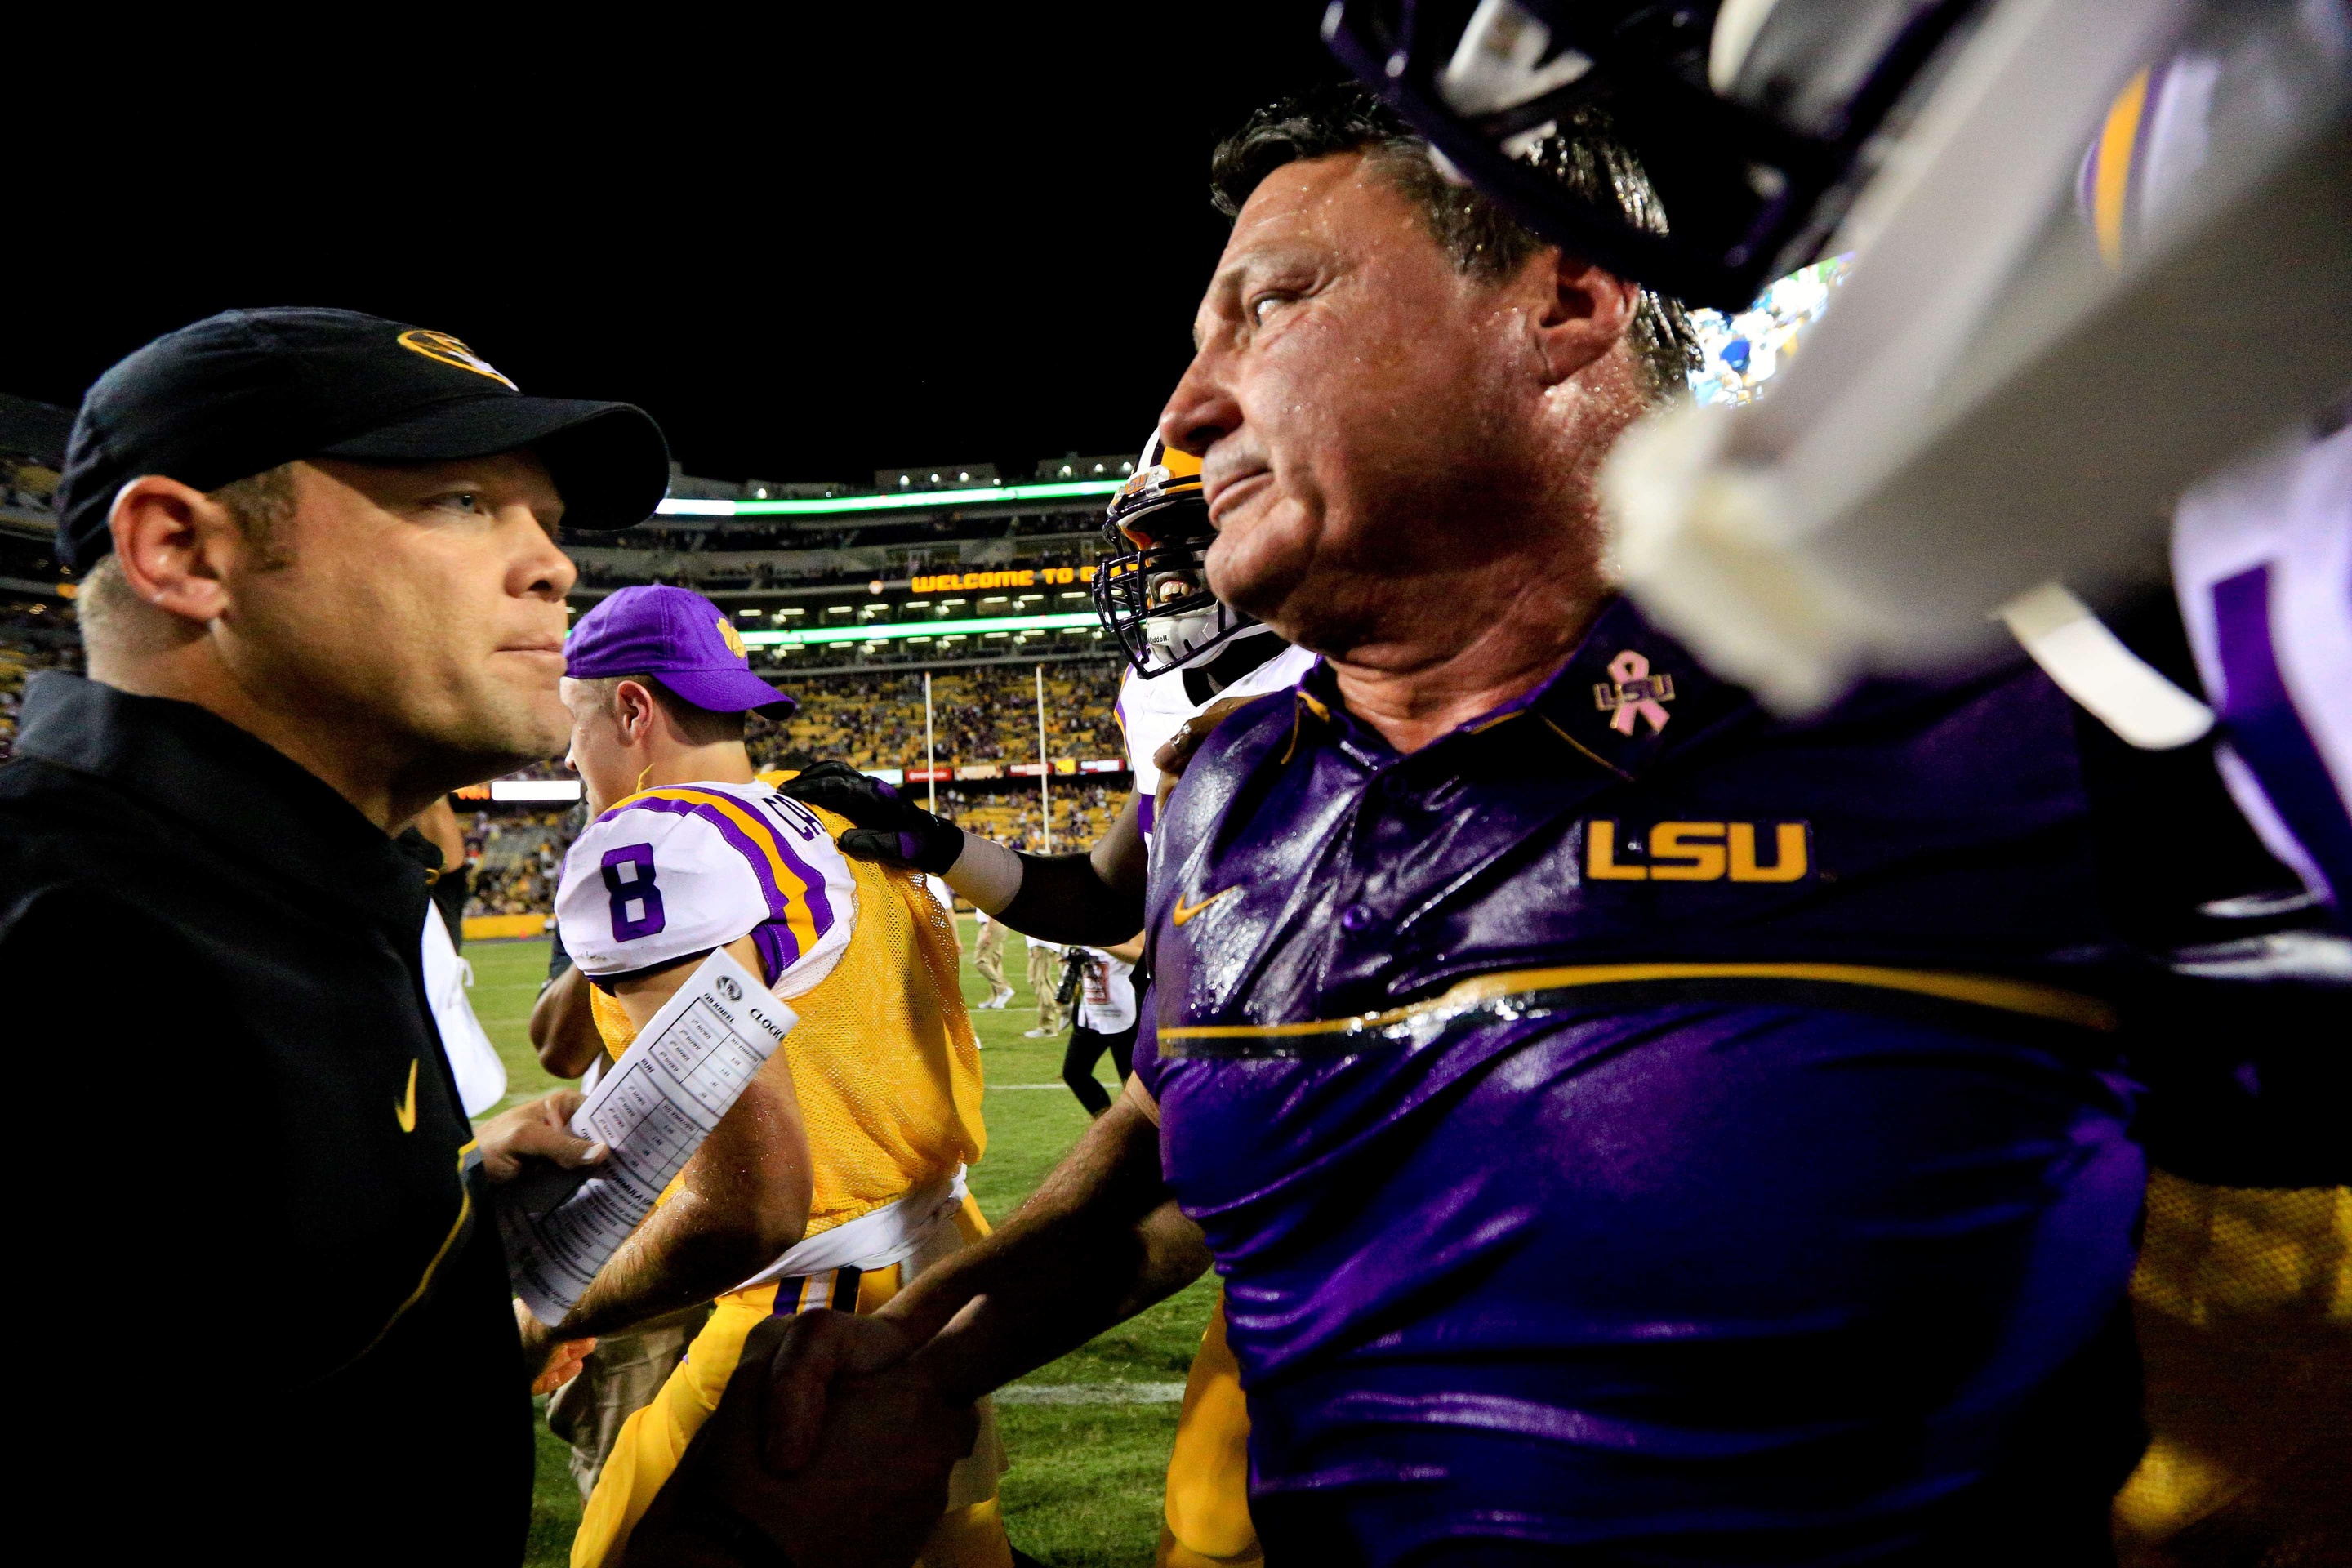 How much has Ed Orgeron changed since Ole Miss?